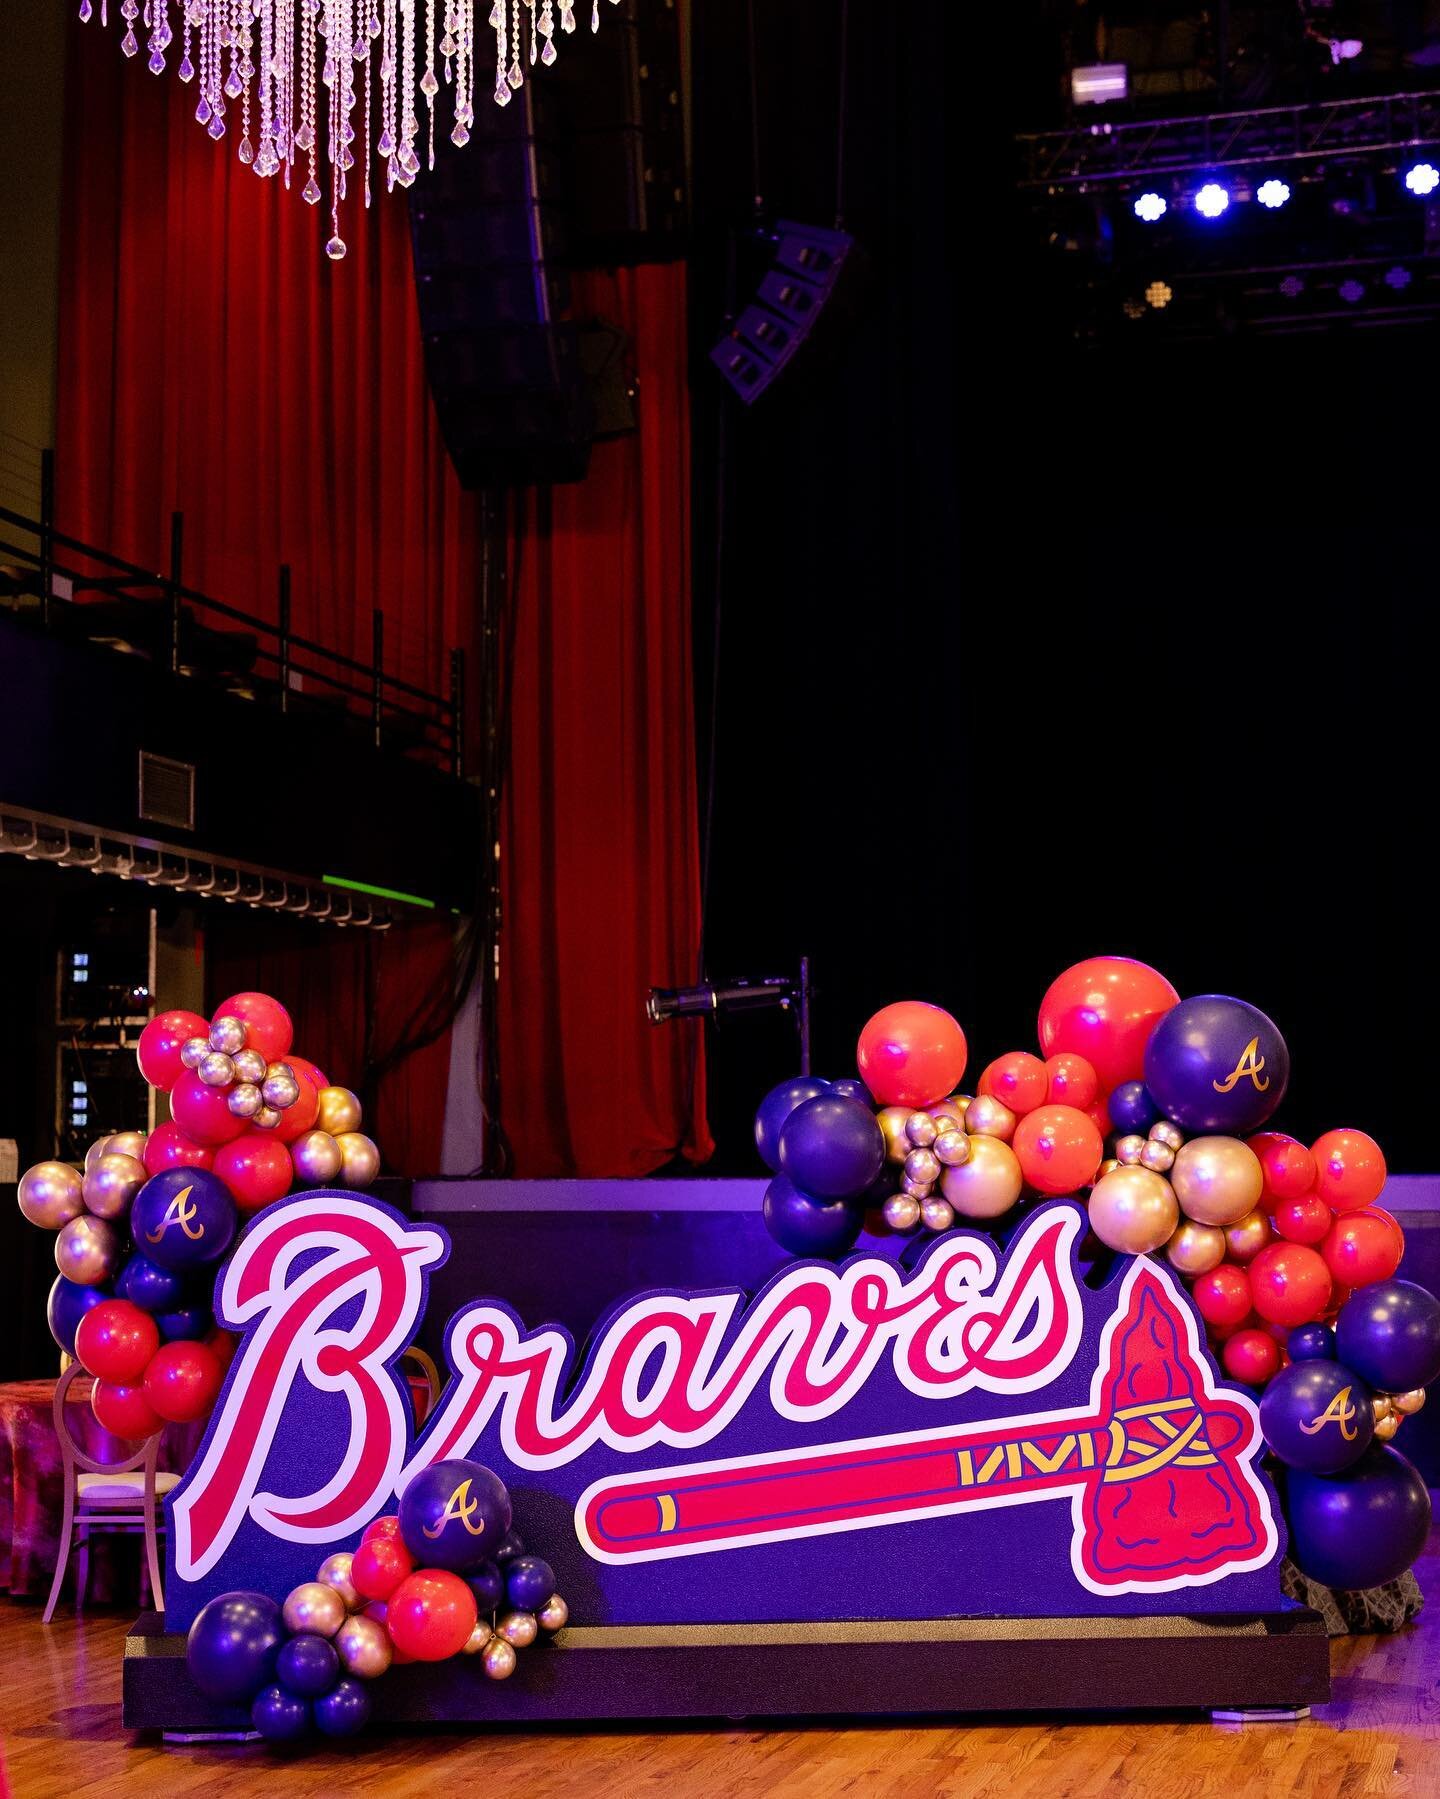 When you had Monday off it feels like Monday on a Tuesday&hellip;#amiright?! Good thing I like my Mondays, so here&rsquo;s to a great week! Here&rsquo;s a few shots of some balloon fun we had last week for the home opener! #braves #forthea #balloonde